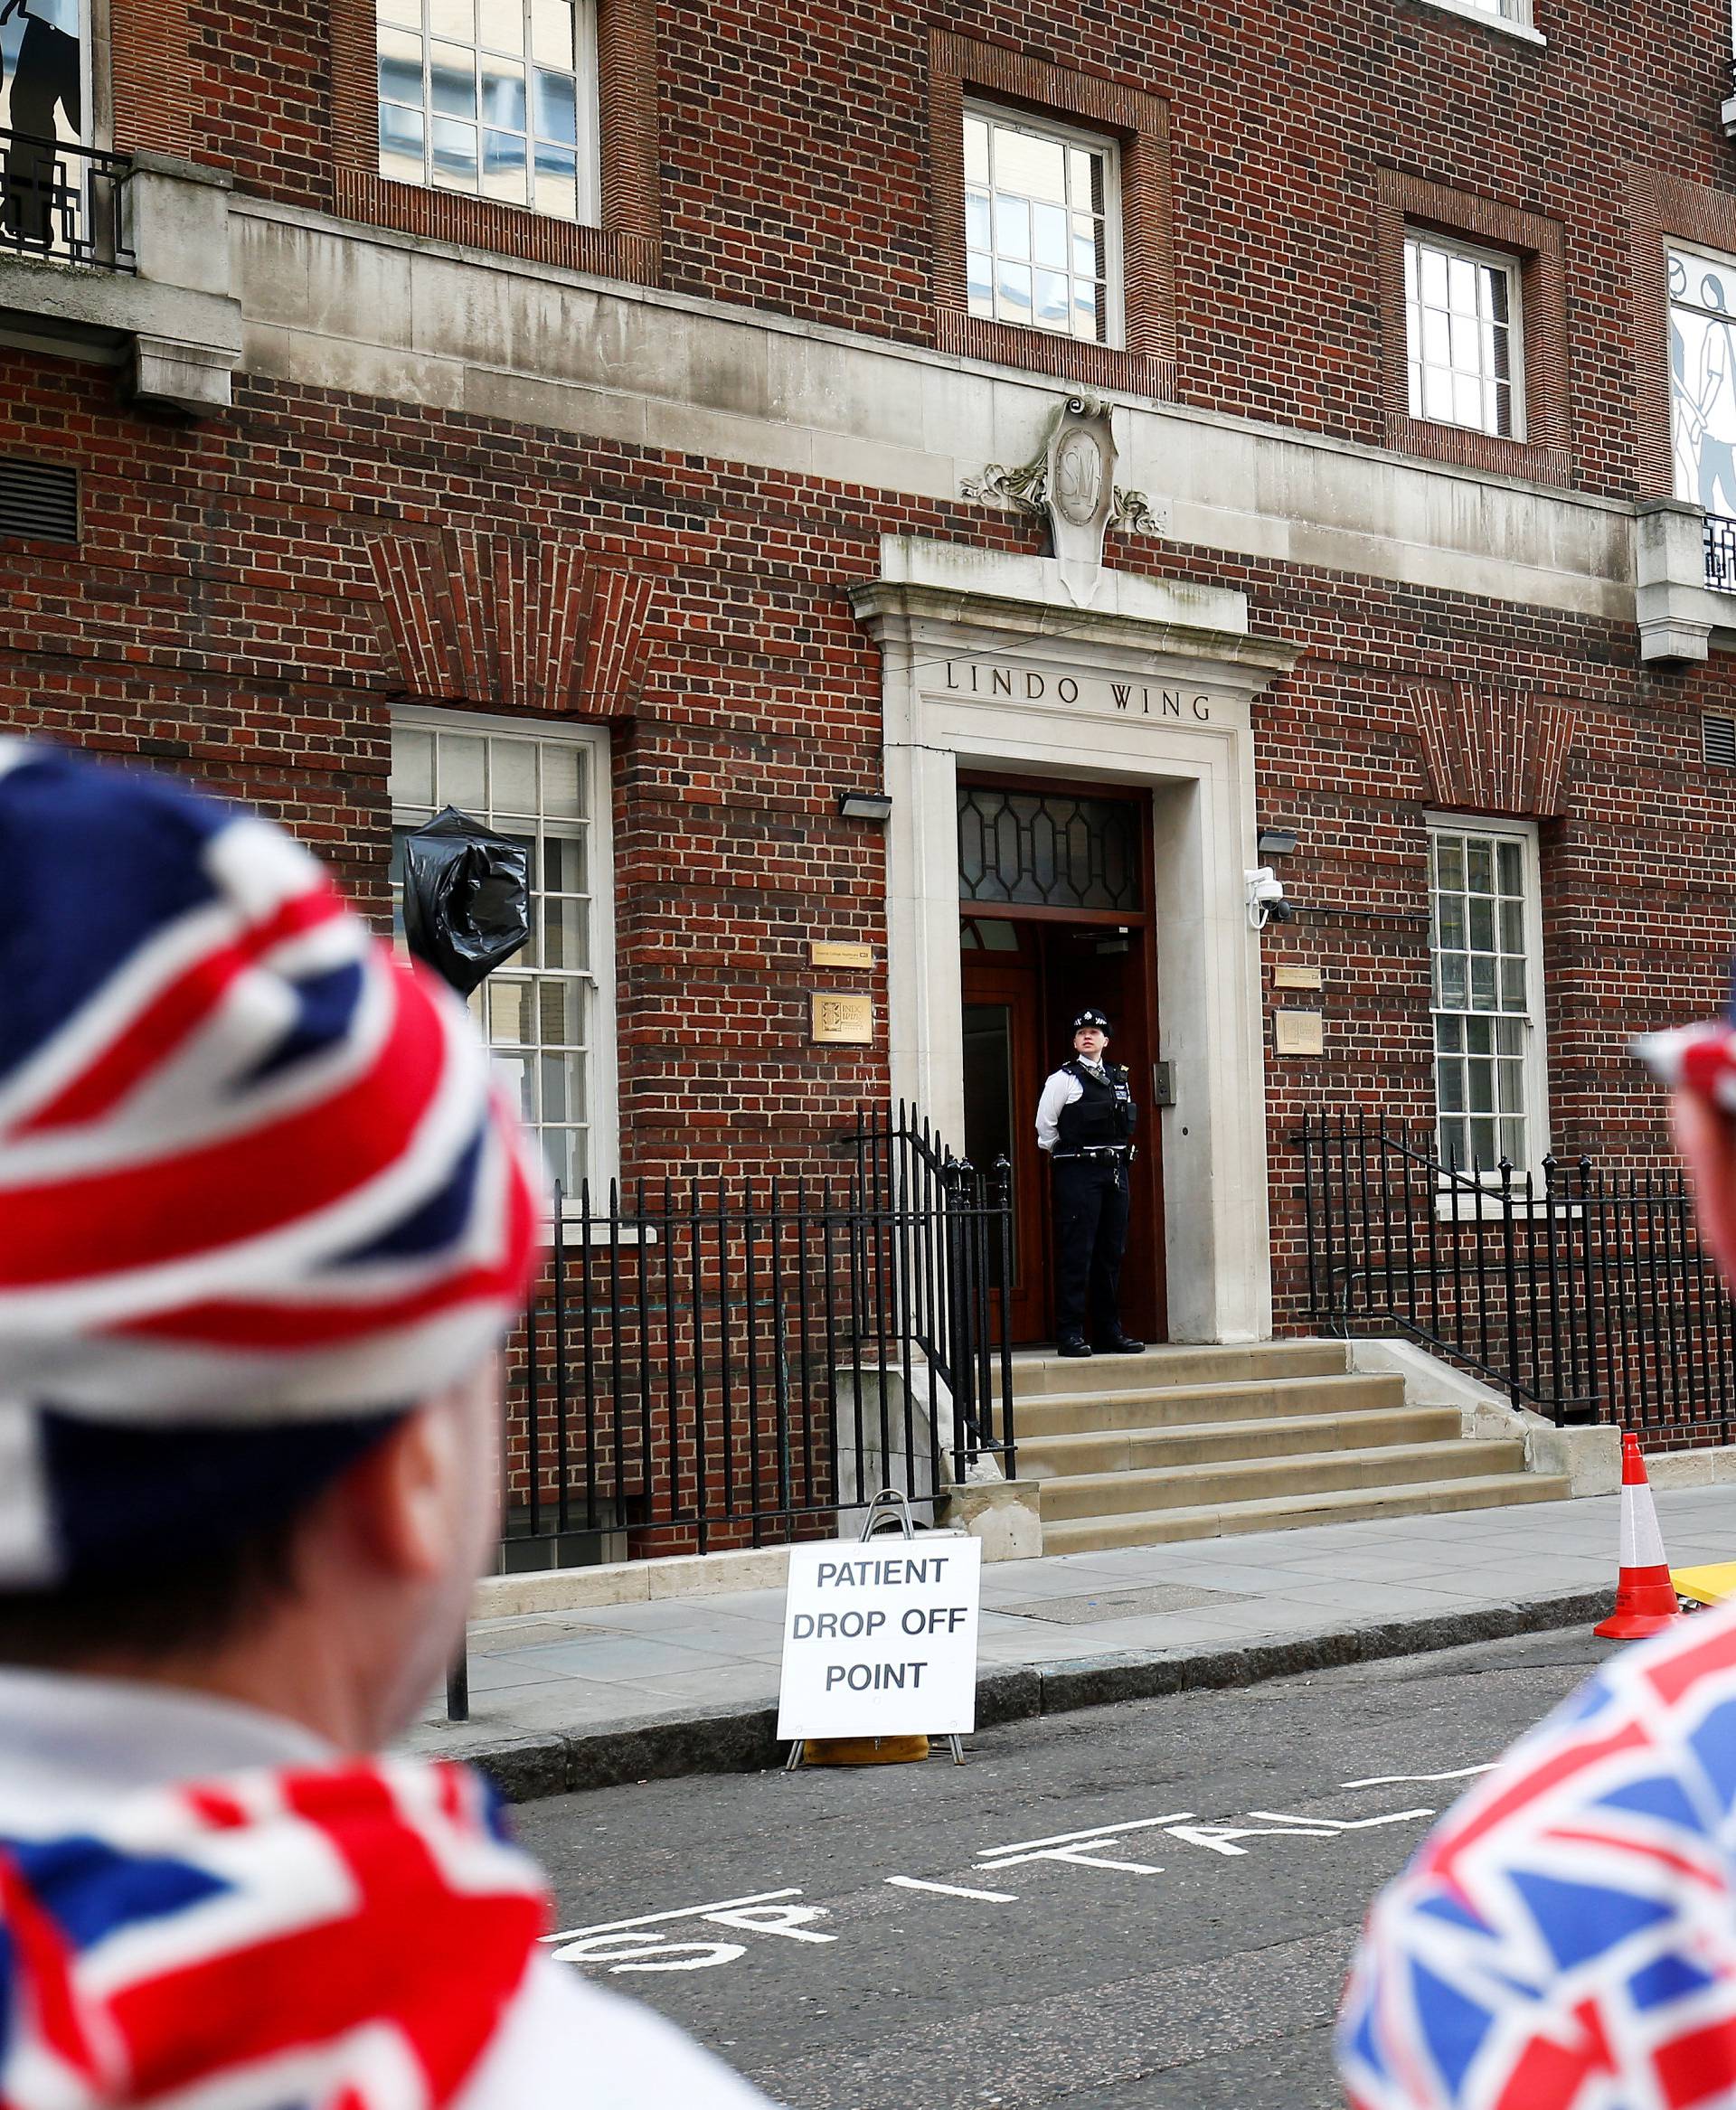 Supporters of the royal family stand outside the Lindo Wing of St Mary's Hospital after Britain's Catherine, the Duchess of Cambridge, was admitted after going into labour ahead of the birth of her third child, in London